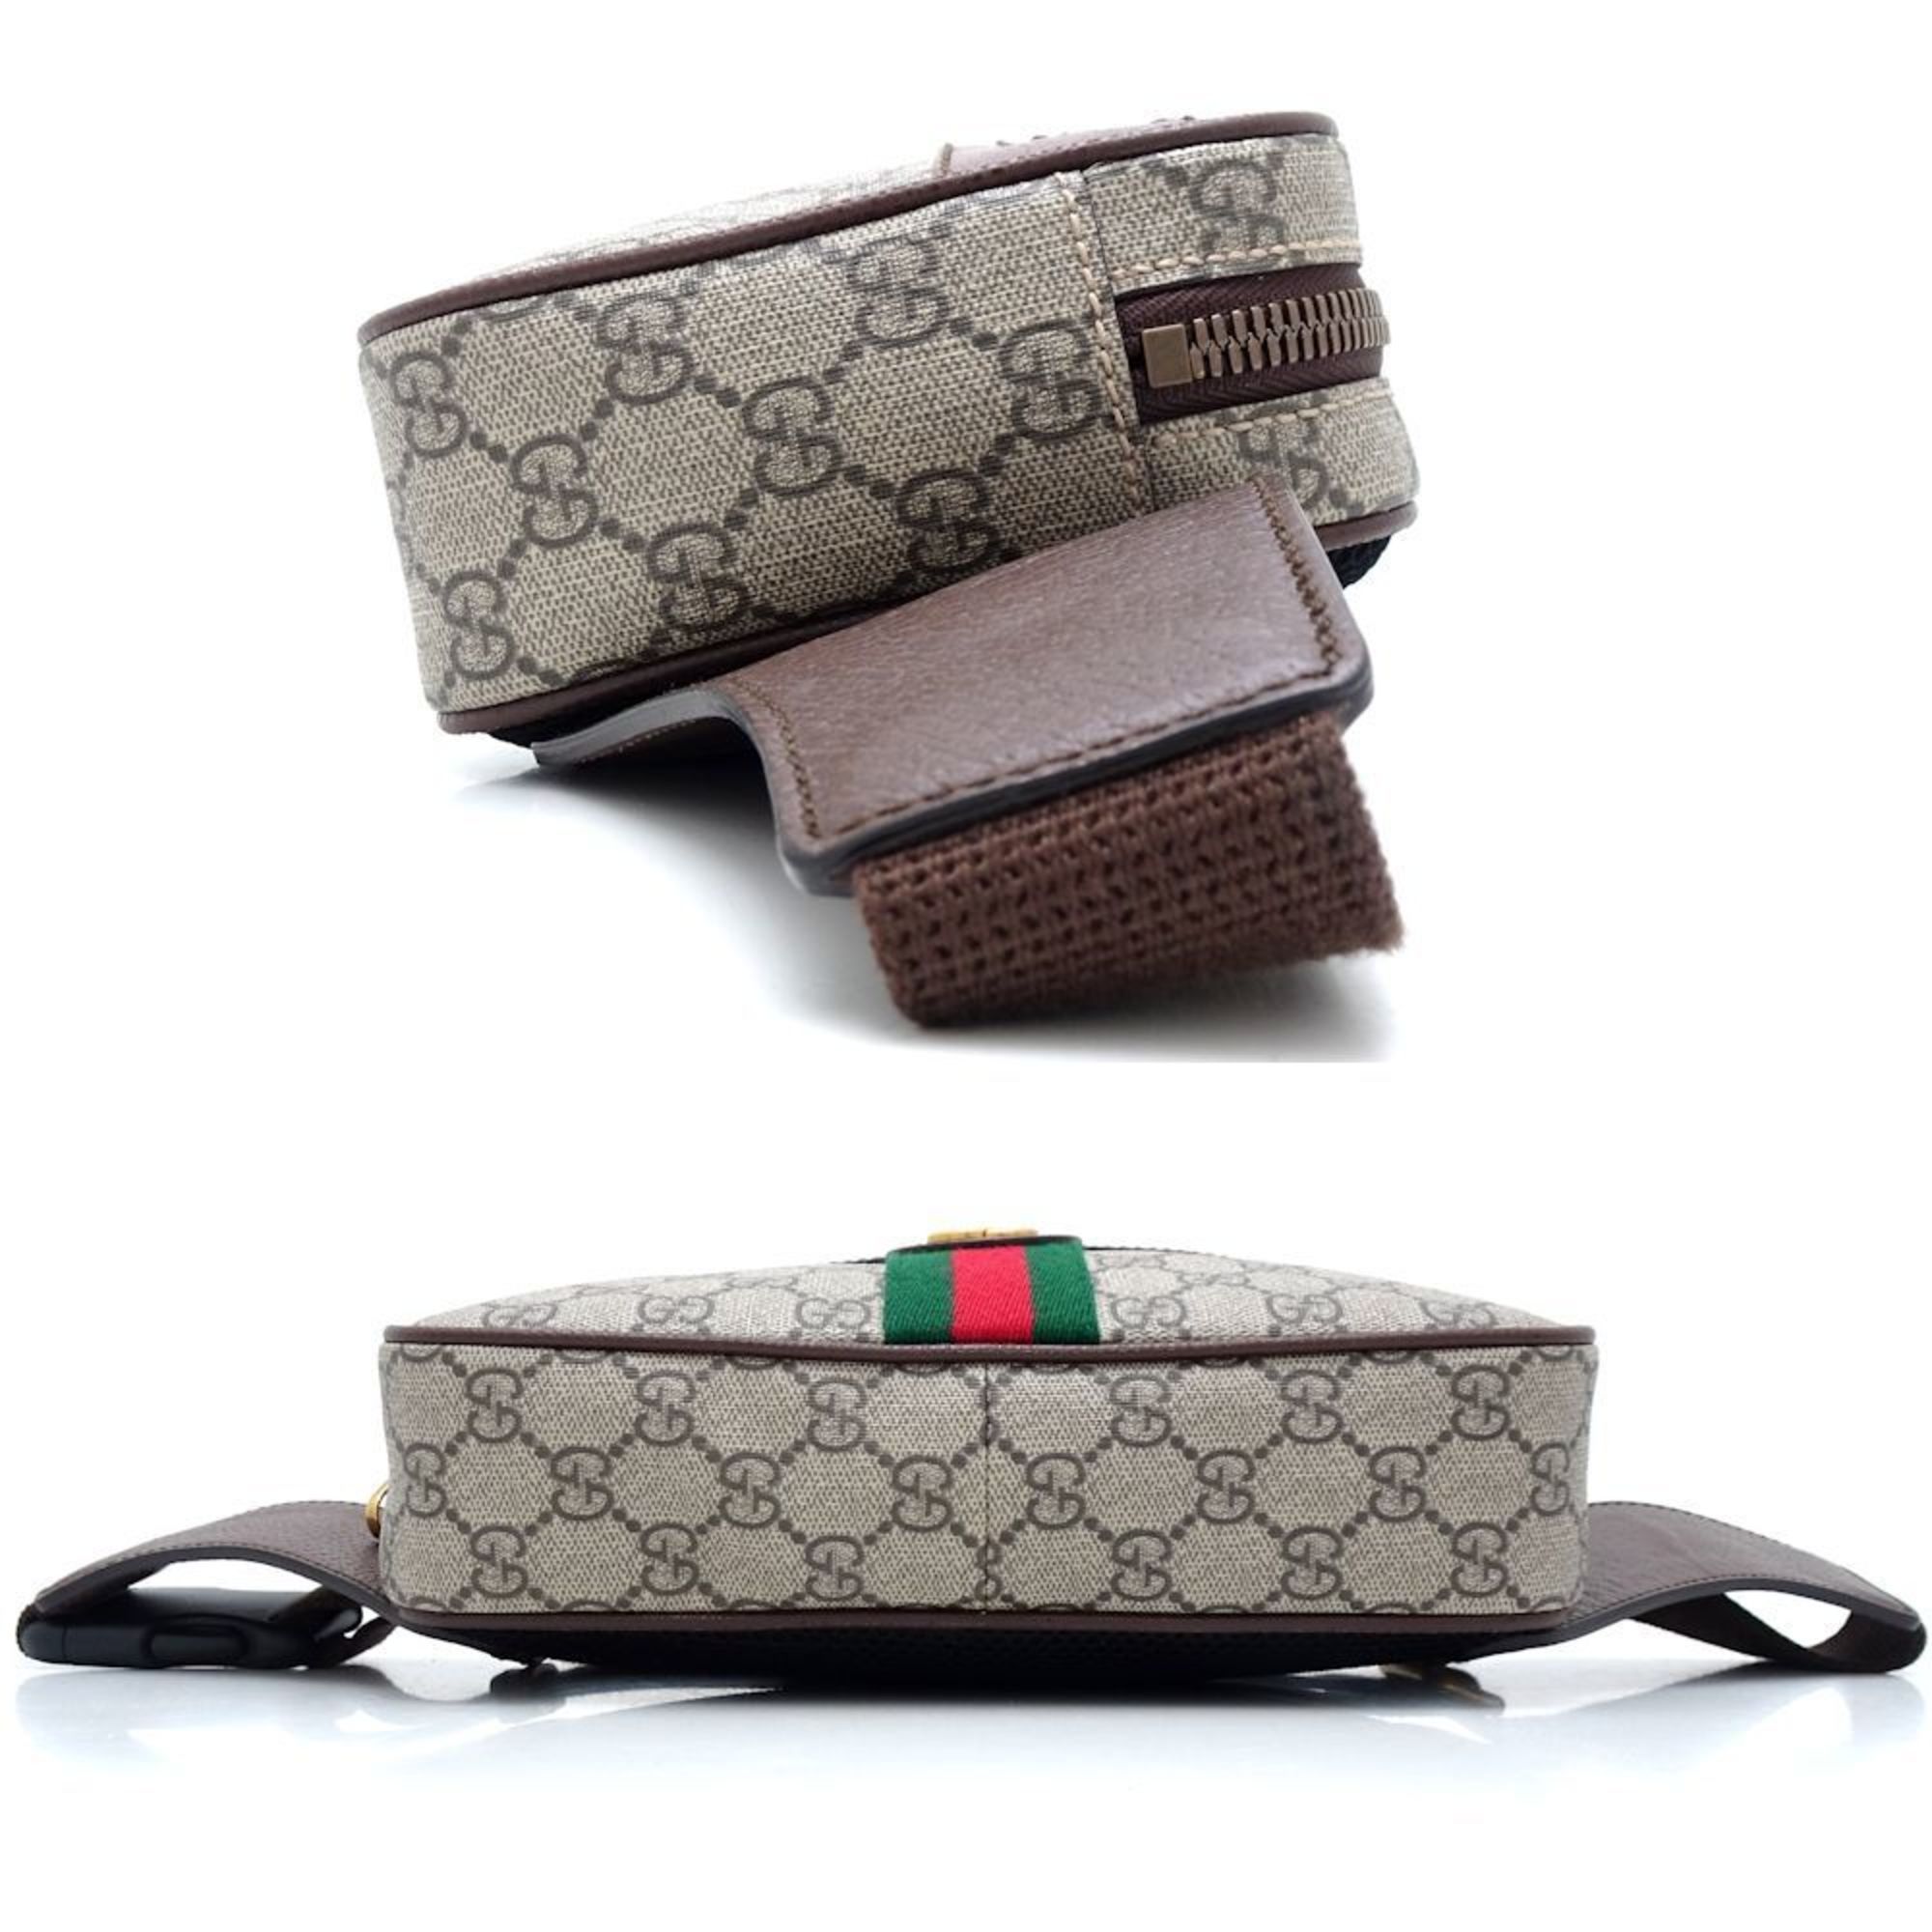 GUCCI GG Belt Bag 574796 Body Ophidia Soft Supreme Canvas x Leather Beige Brown 350825